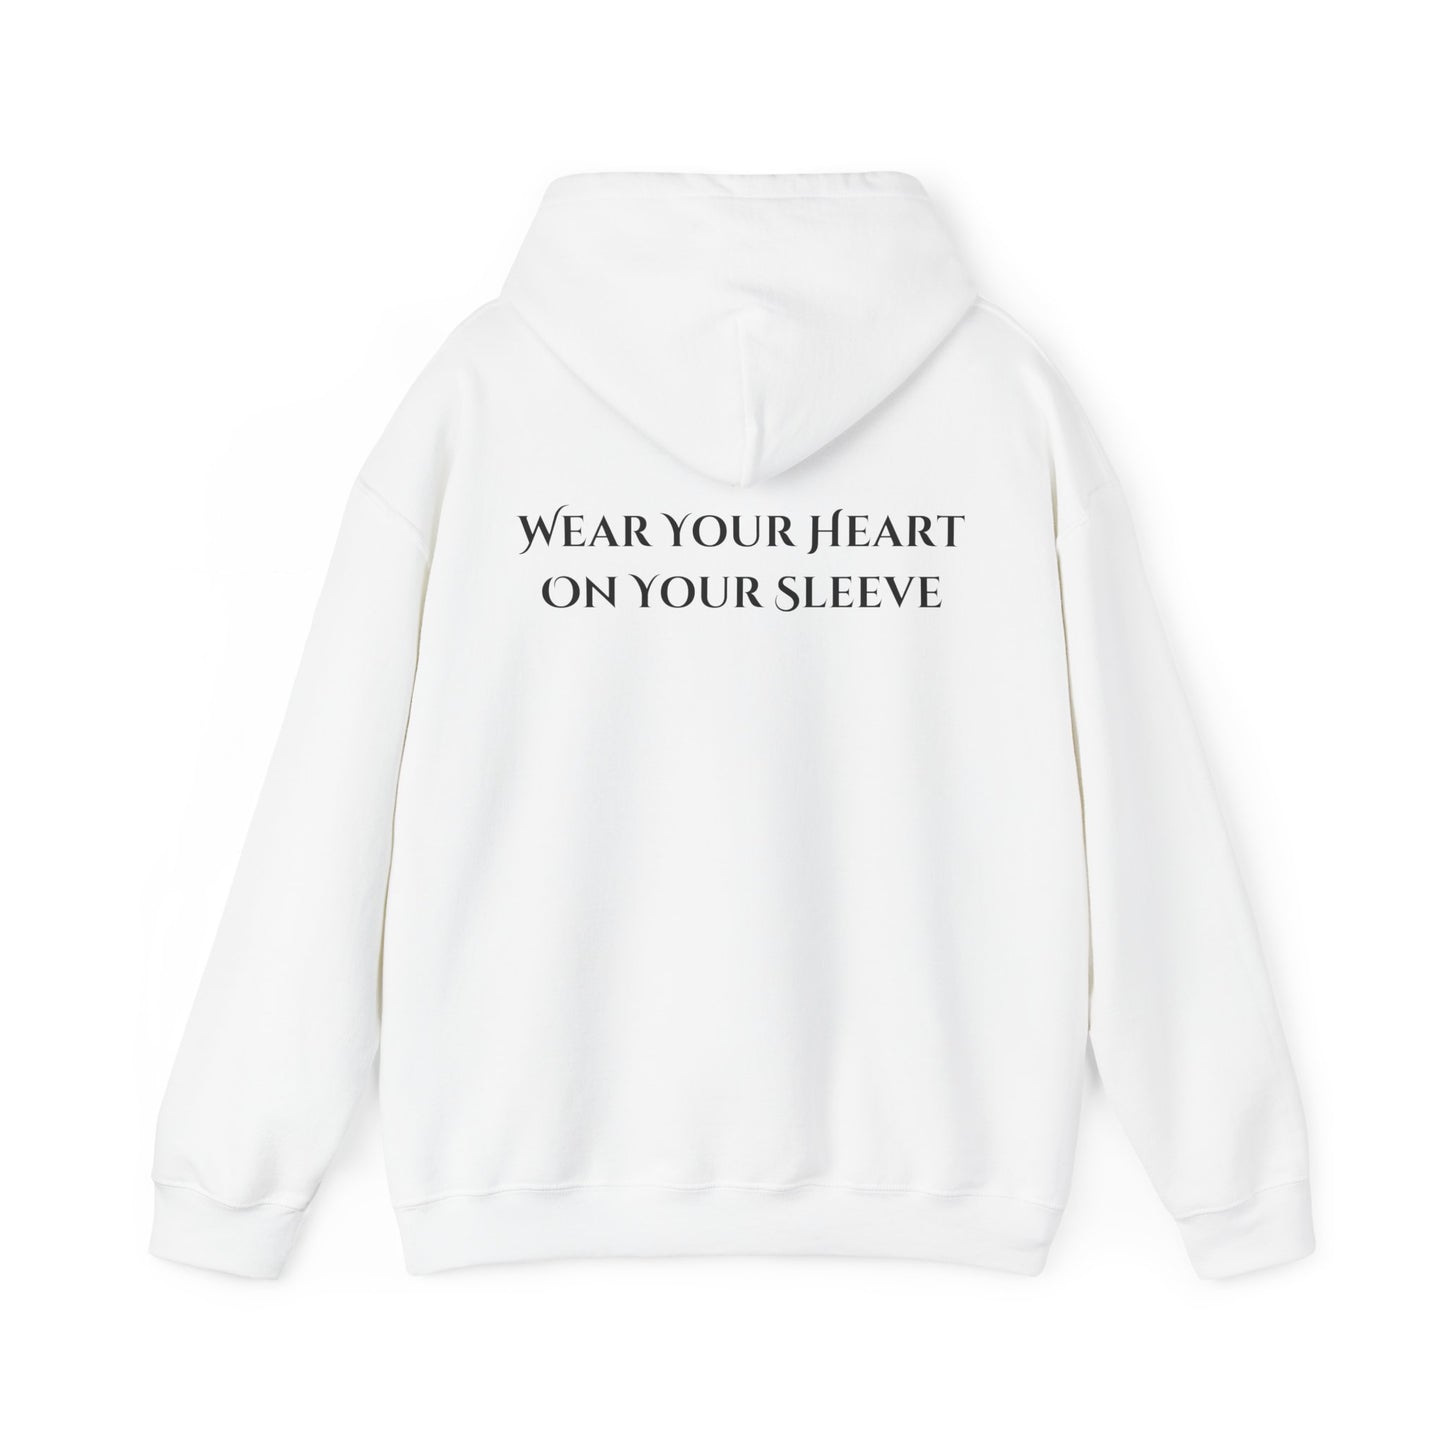 Wear Your Heart On Your Sleeve Unisex Hoodie